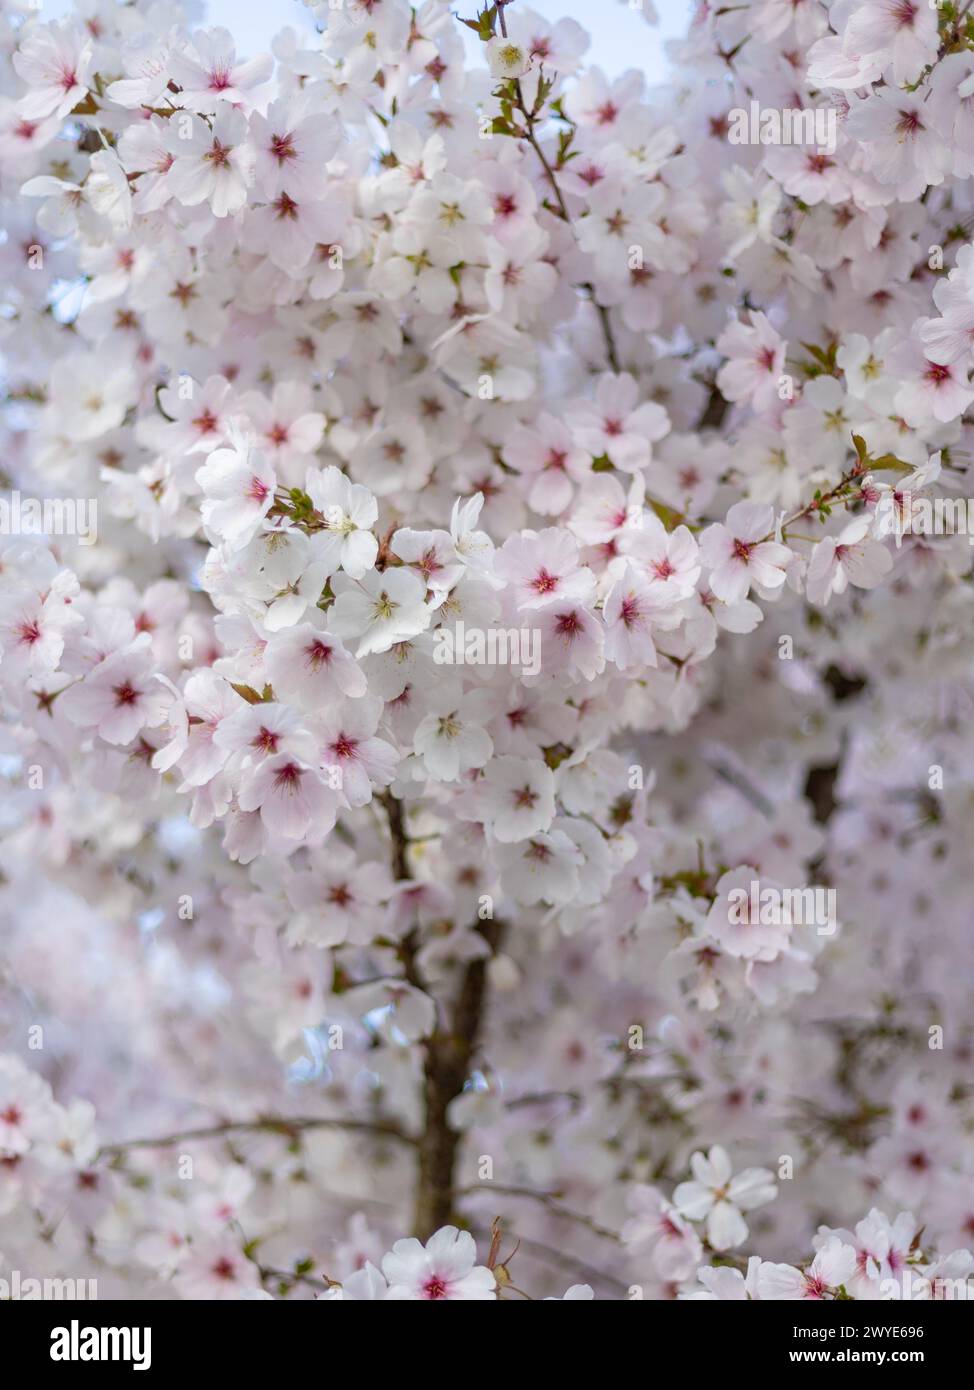 Small tree full of cherry blossoms in springtime blooming for a short time. After rain the  petite blossom are mostly gone Stock Photo